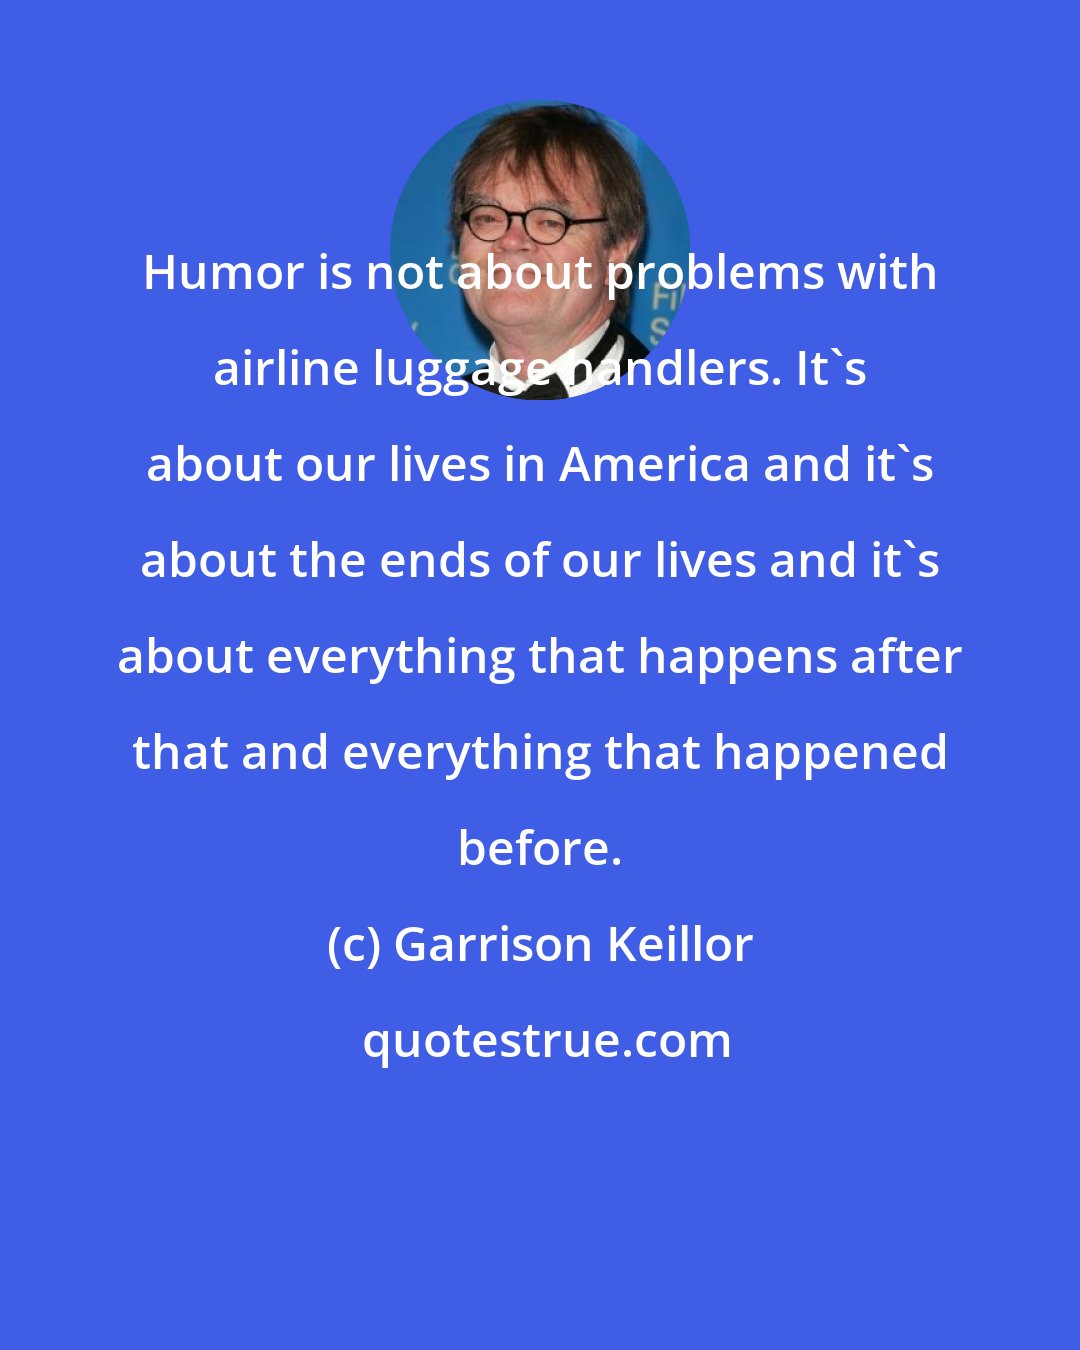 Garrison Keillor: Humor is not about problems with airline luggage handlers. It's about our lives in America and it's about the ends of our lives and it's about everything that happens after that and everything that happened before.